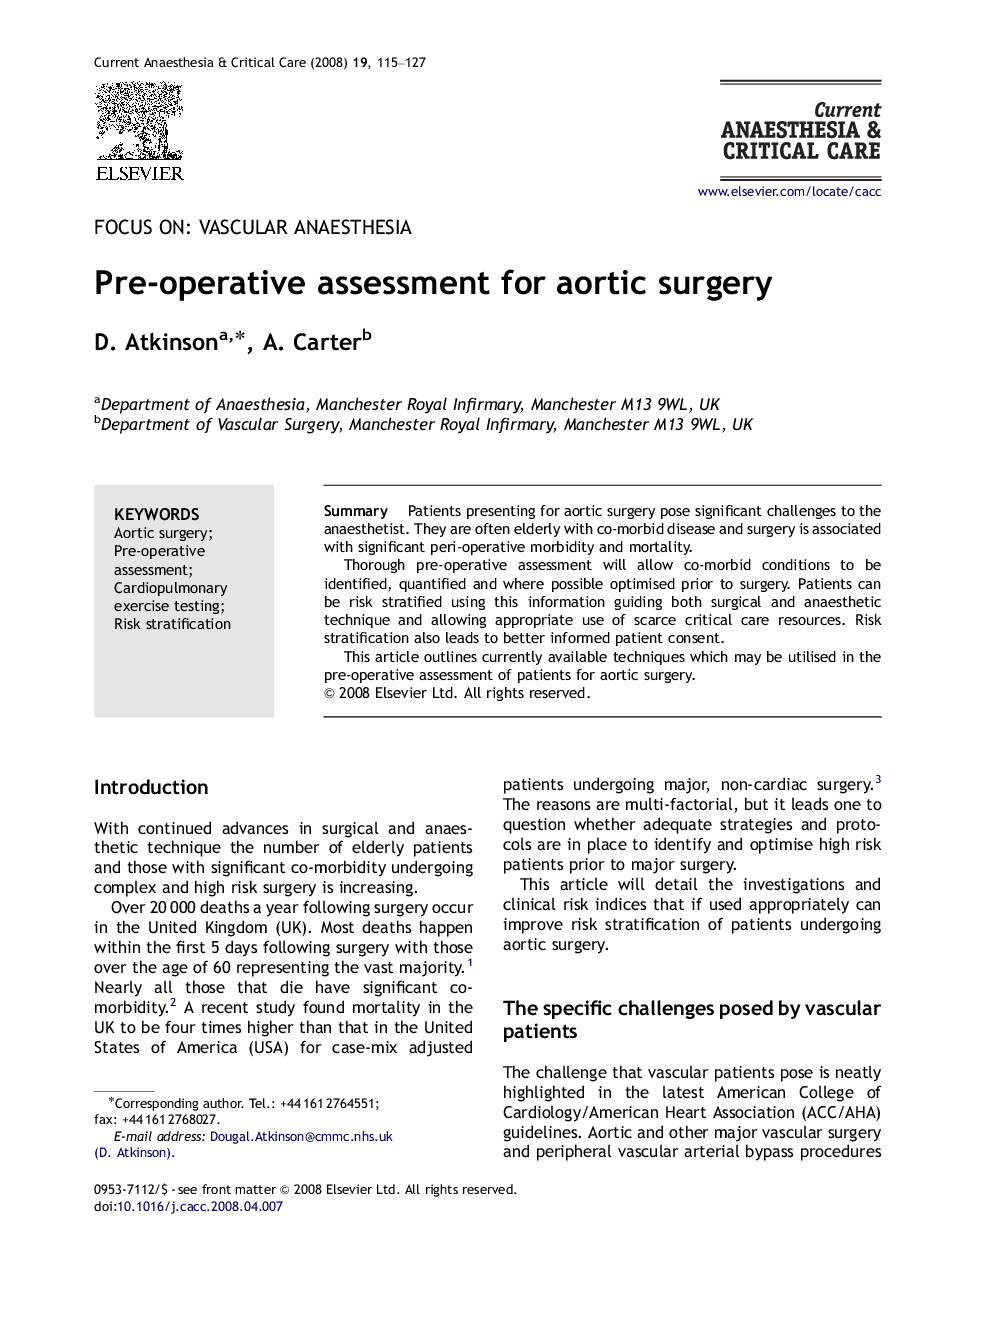 Pre-operative assessment for aortic surgery